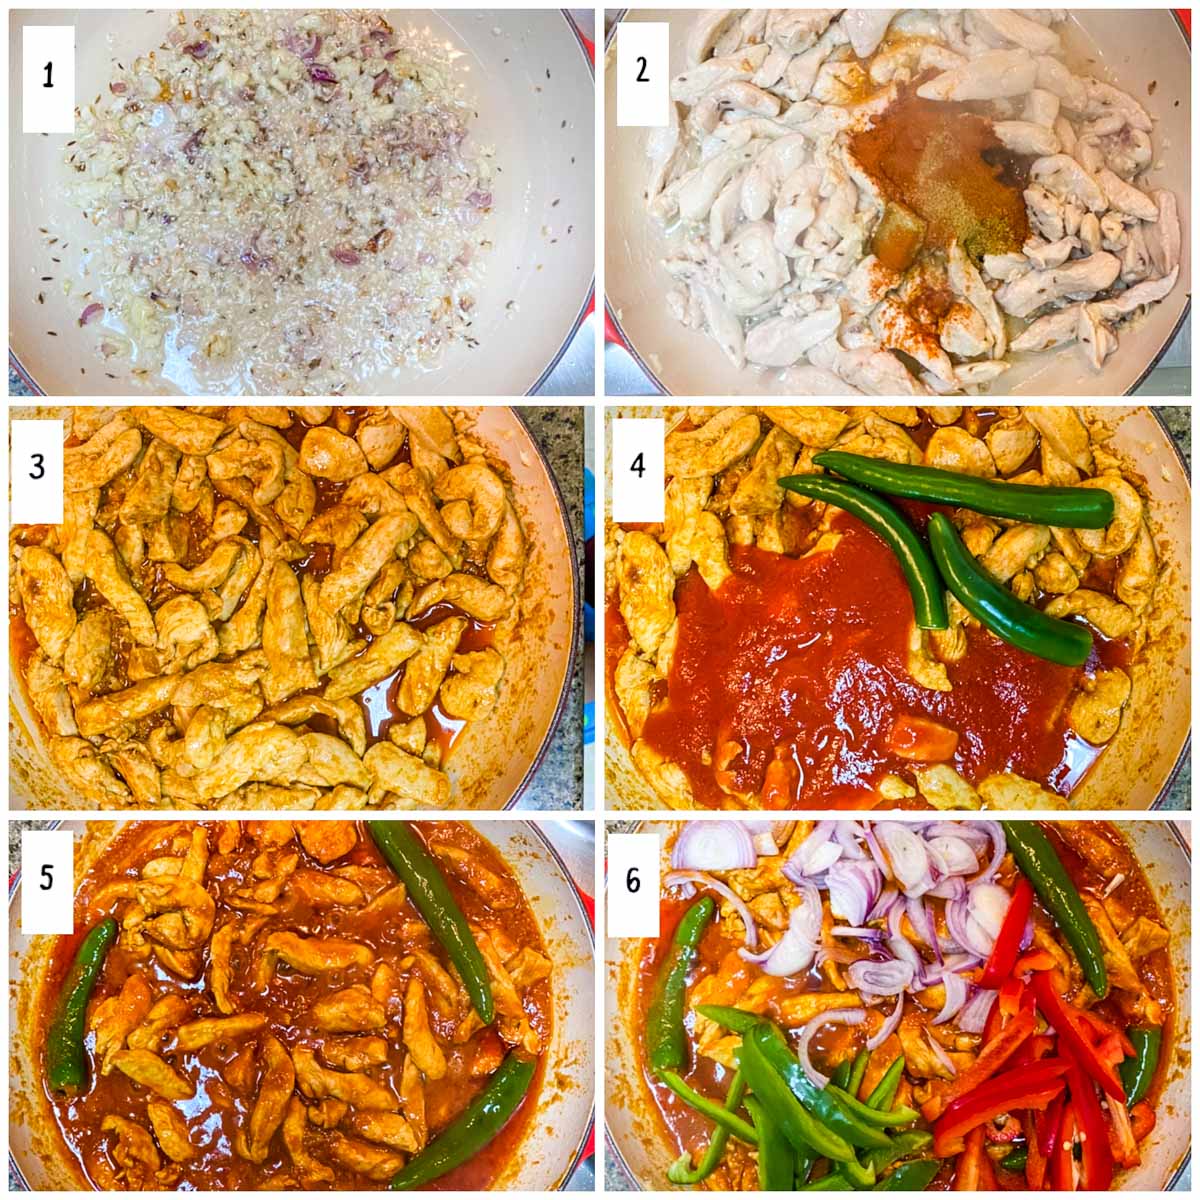 A collage of steps showing how to make chicken jalfrezi at home.